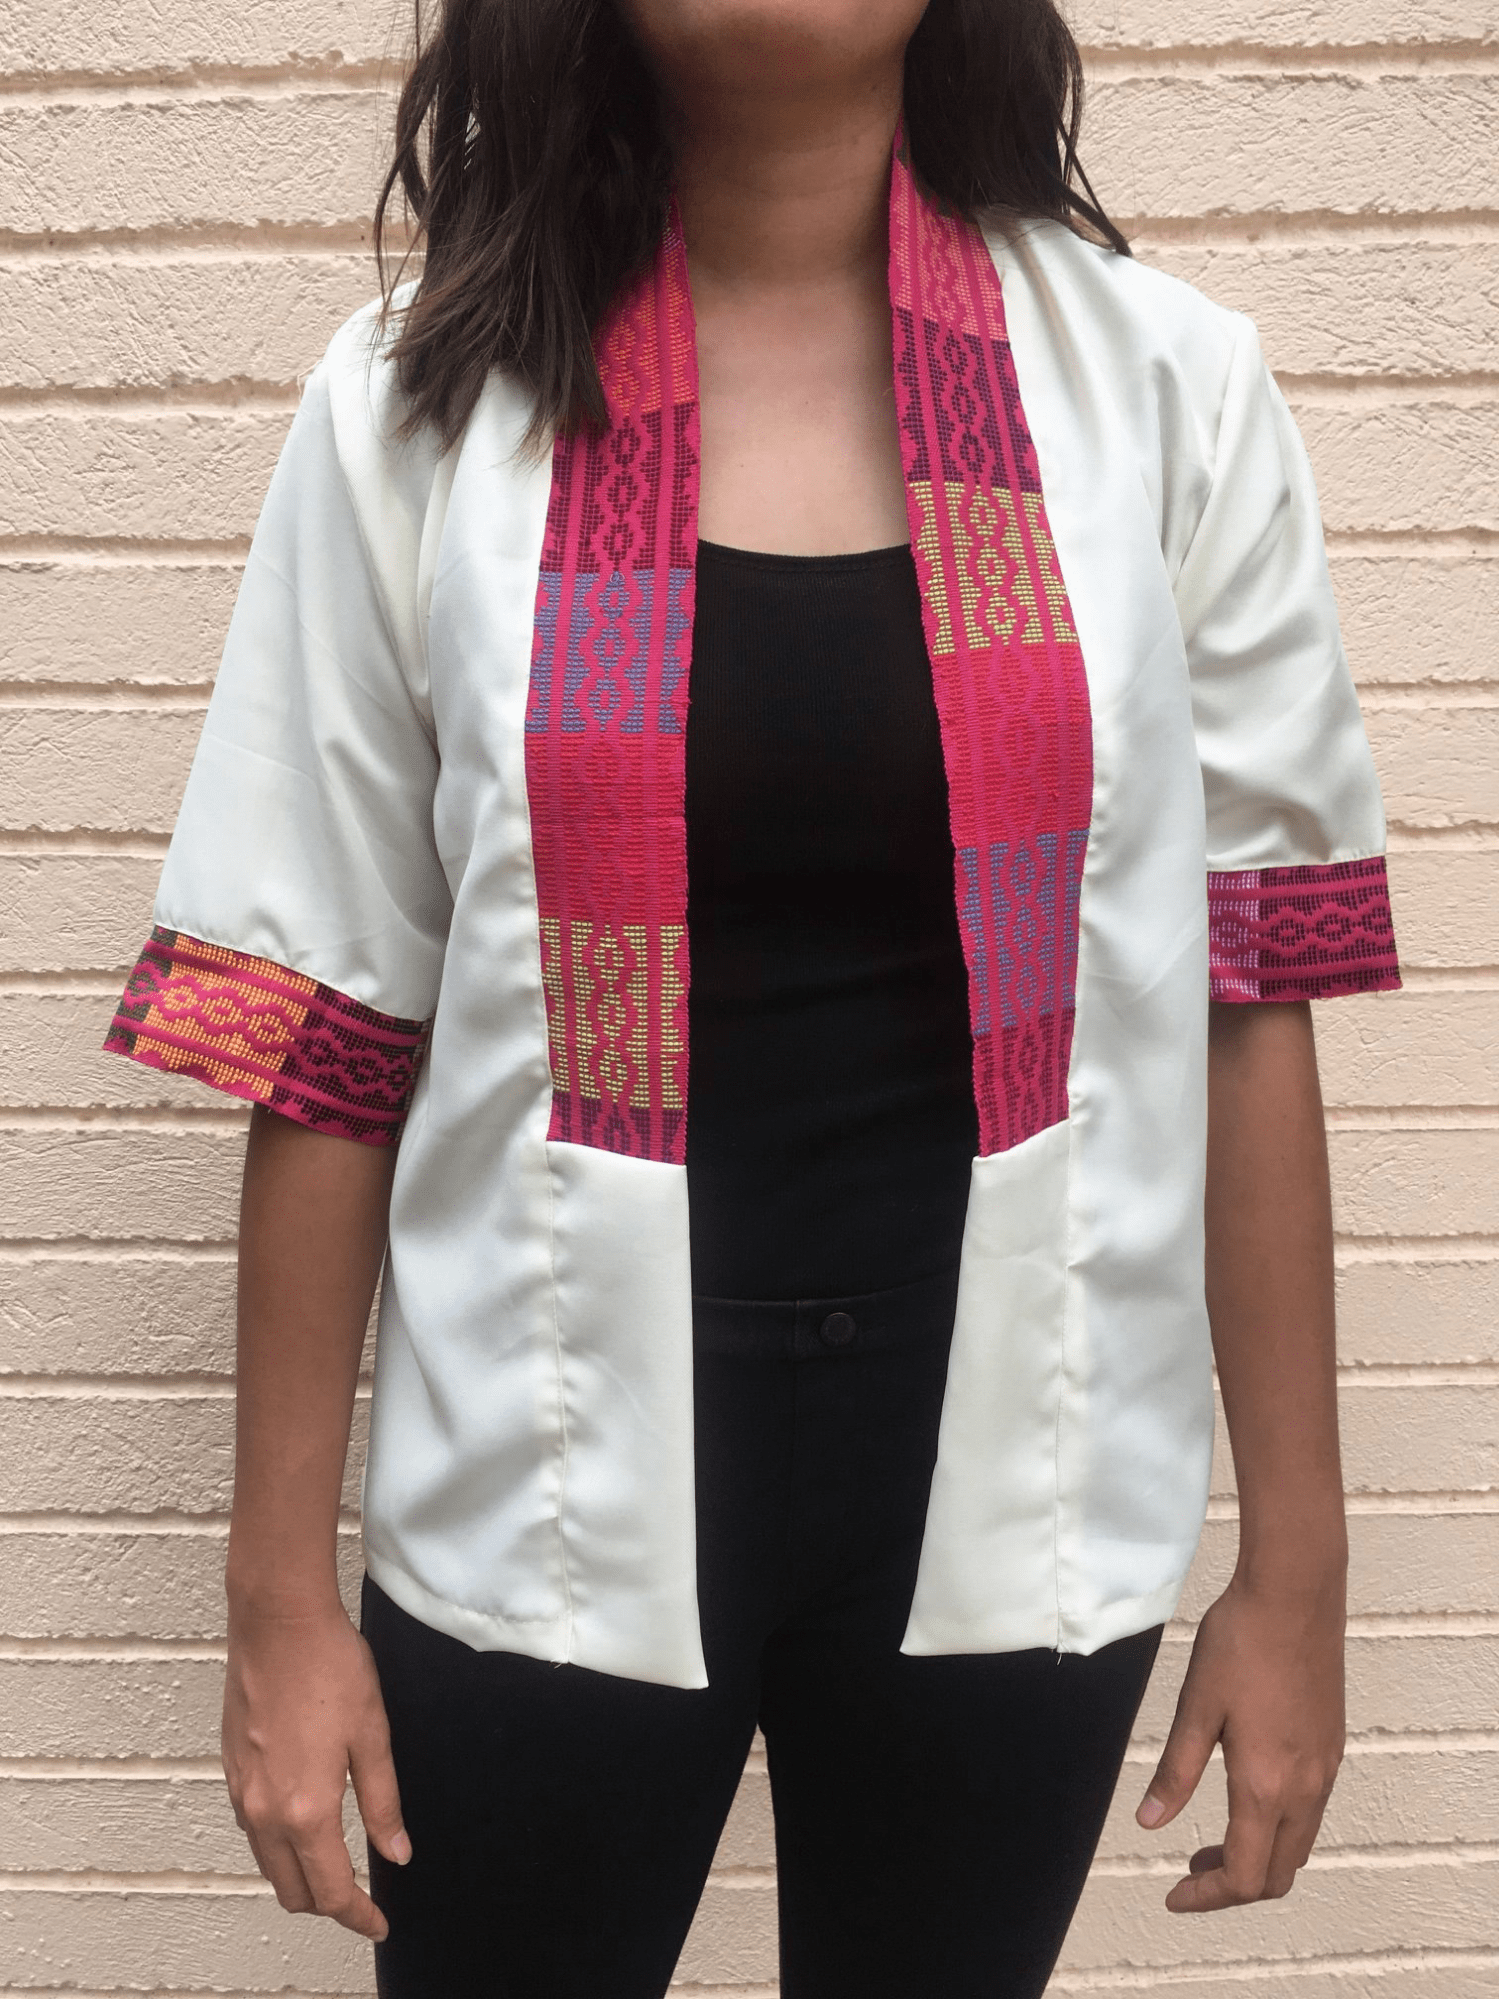 clothes from indigenous fabrics - blazer